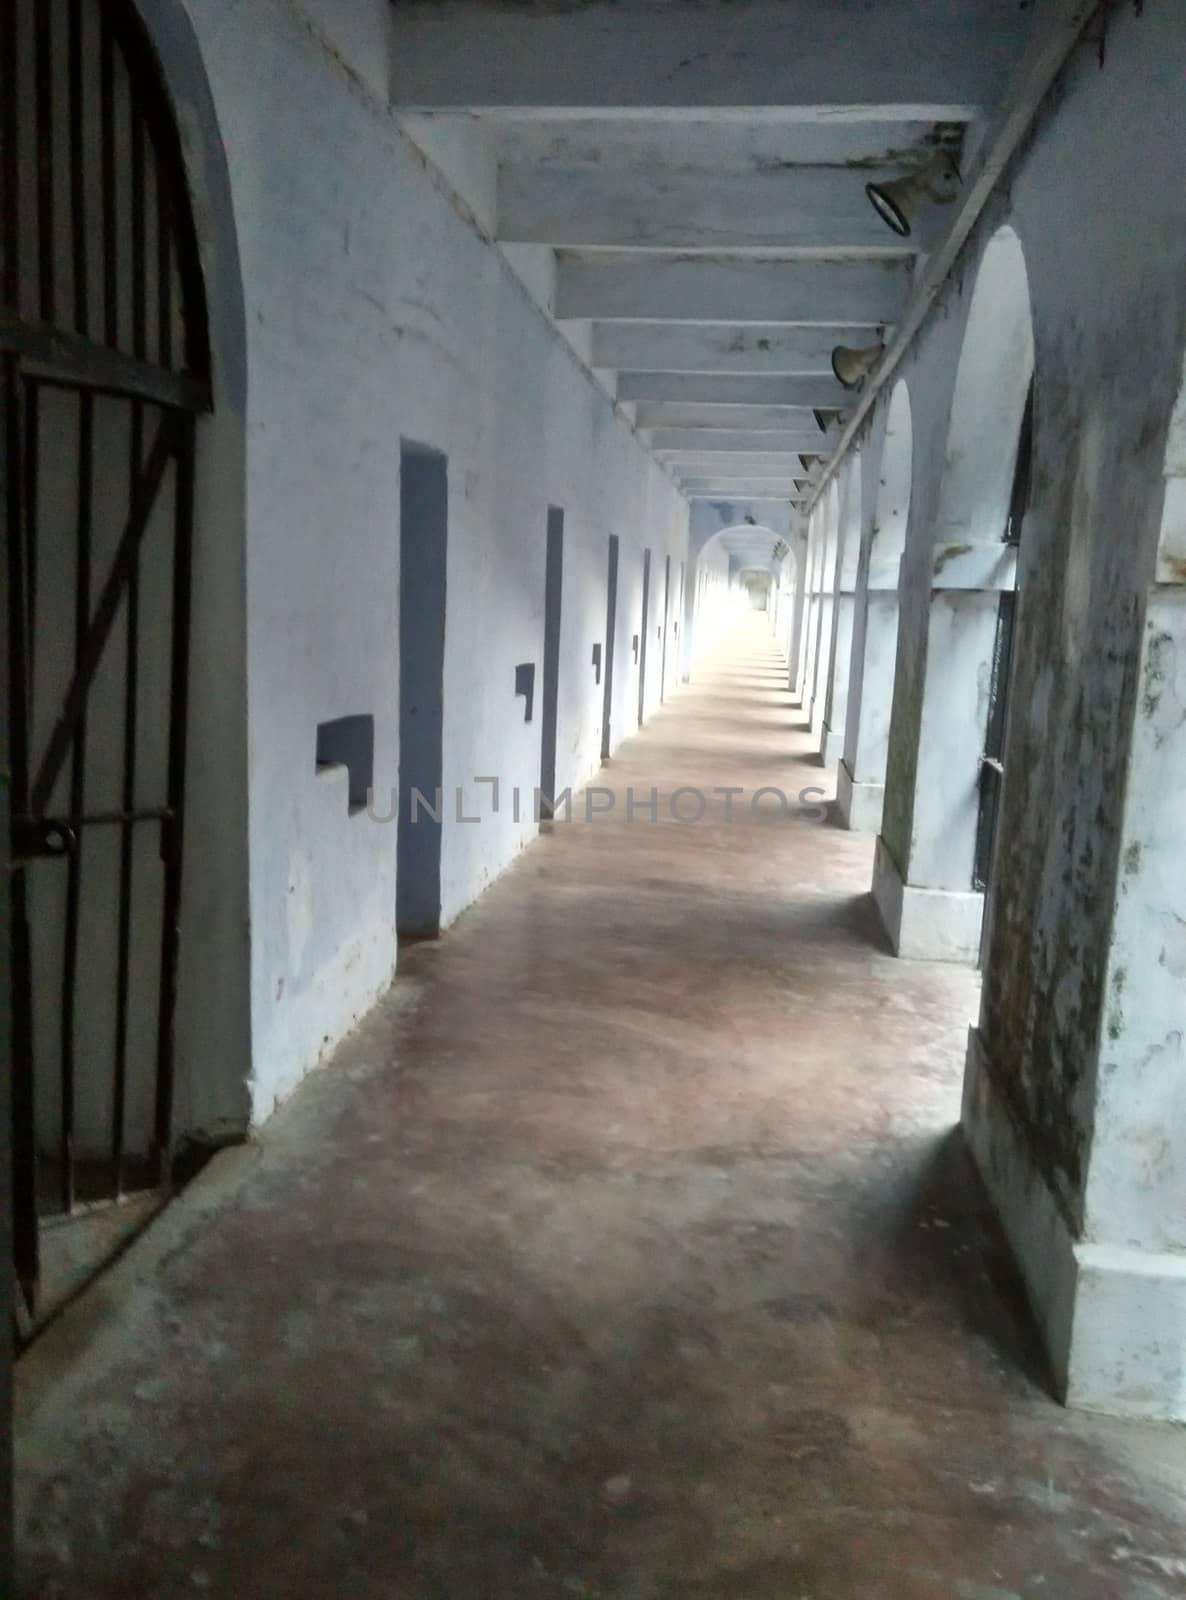 corridors of cellular prison in india by gswagh71